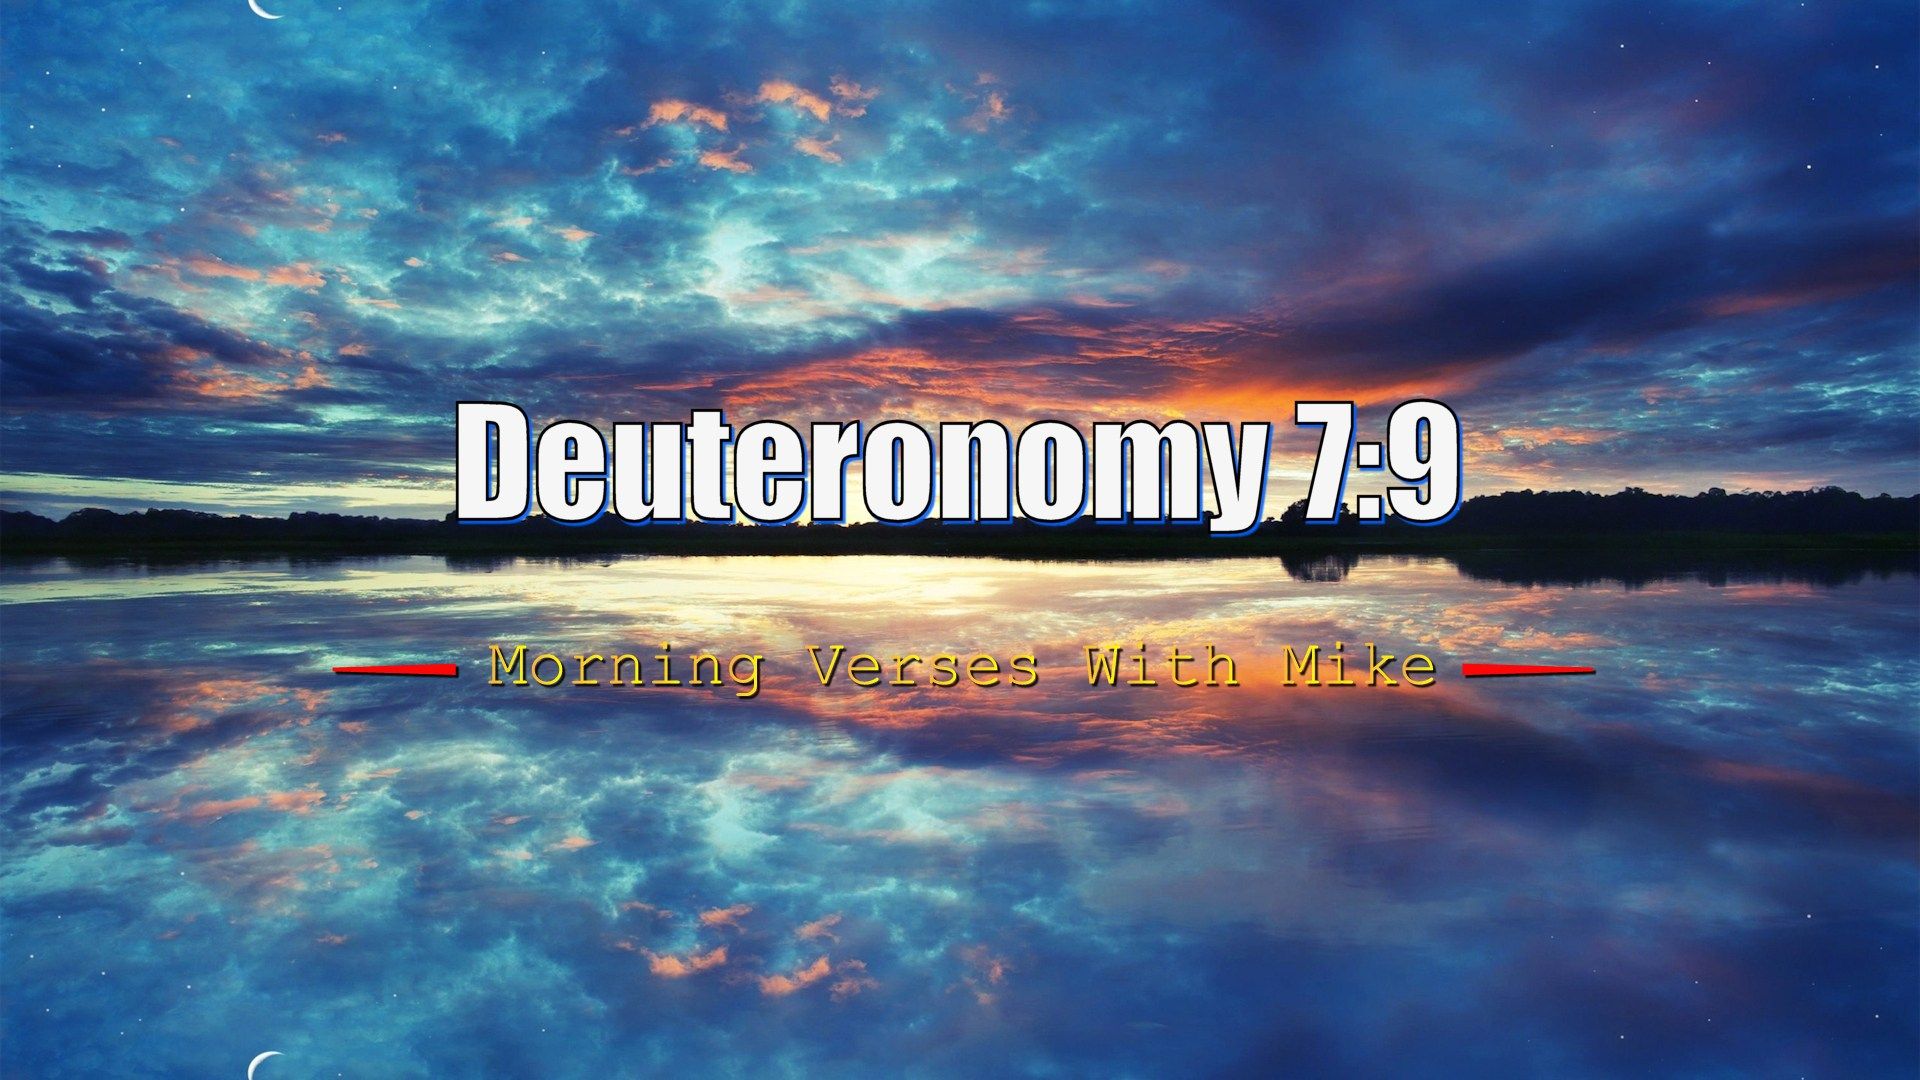 Deuteronomy 7:9. Morning Verses With Mike • Morning Verses With Mike #MVWM